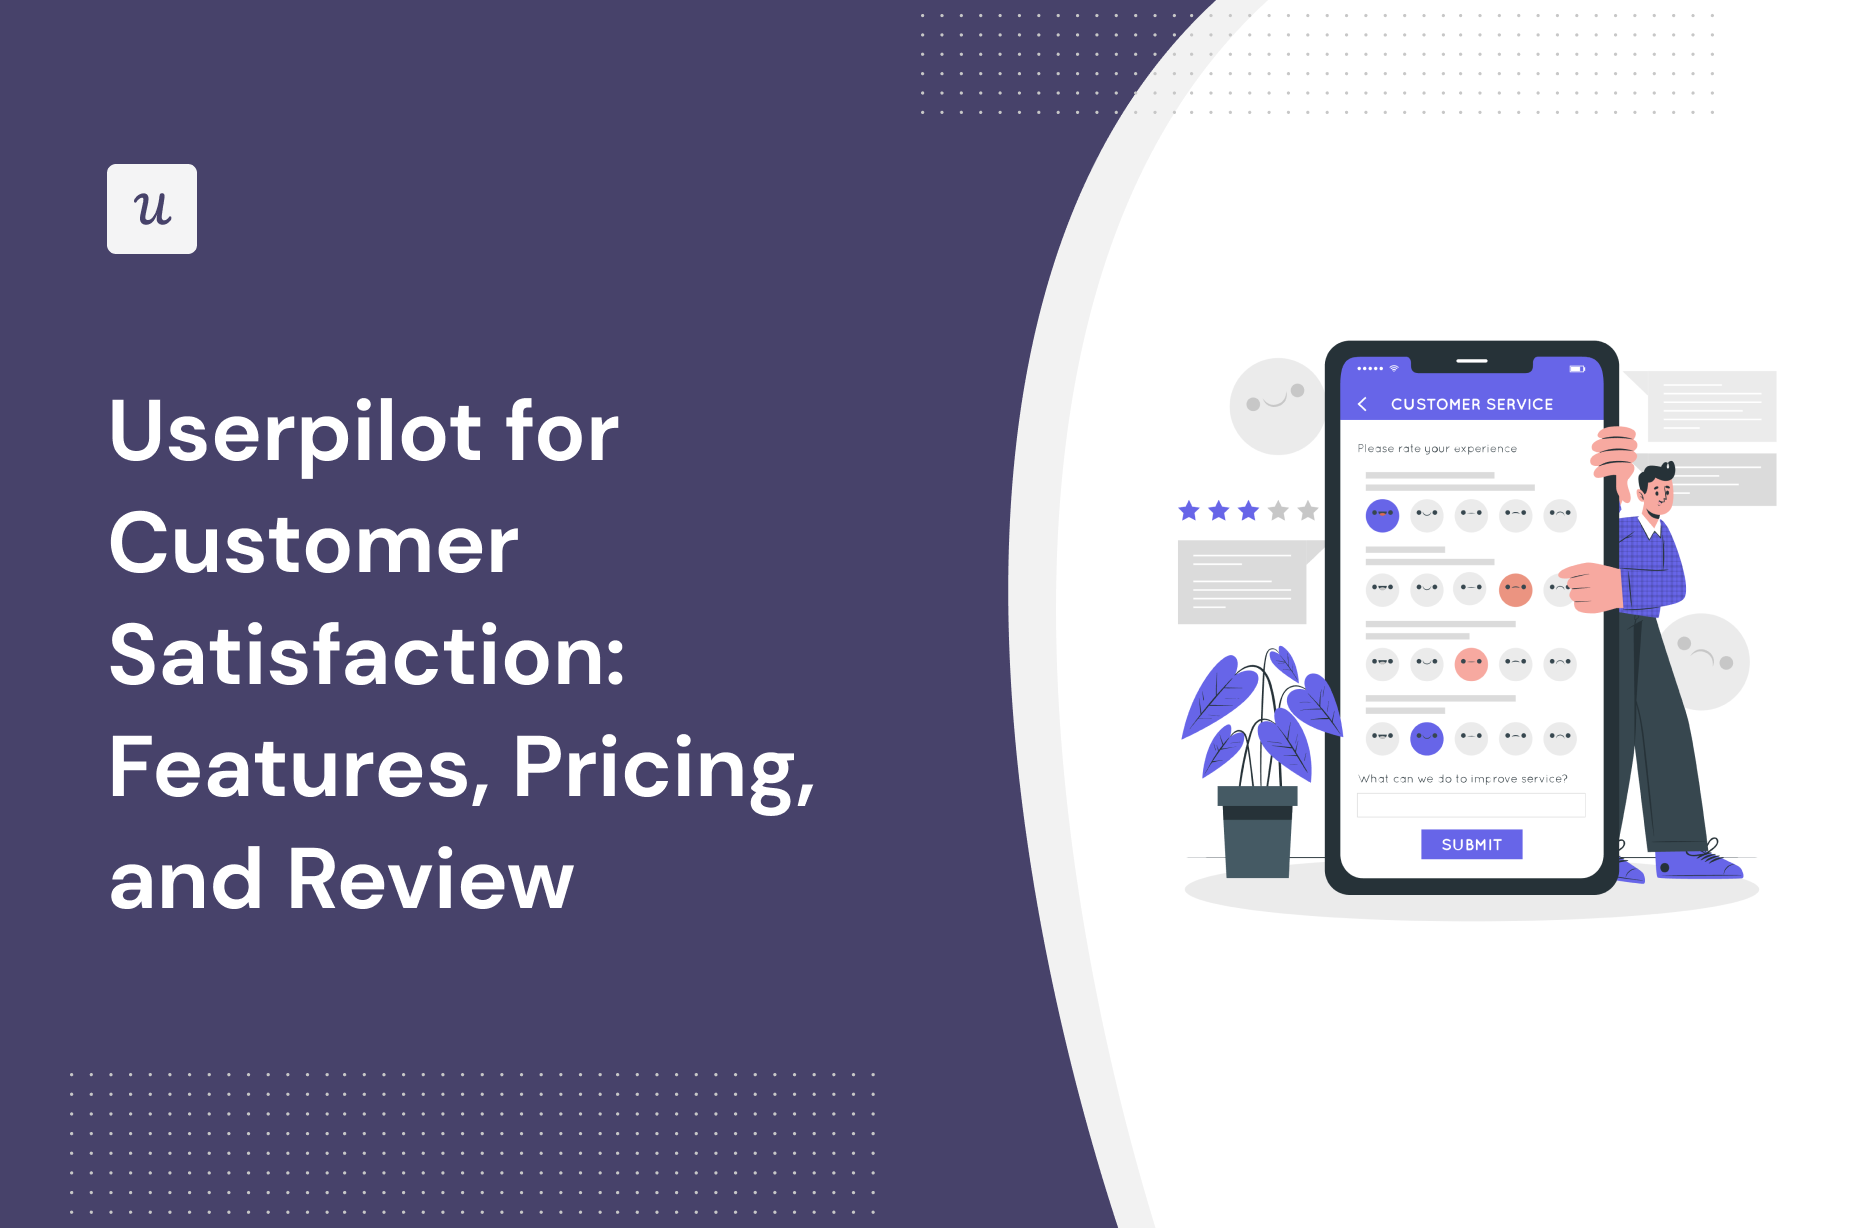 Userpilot for Customer Satisfaction: Features, Pricing, and Review